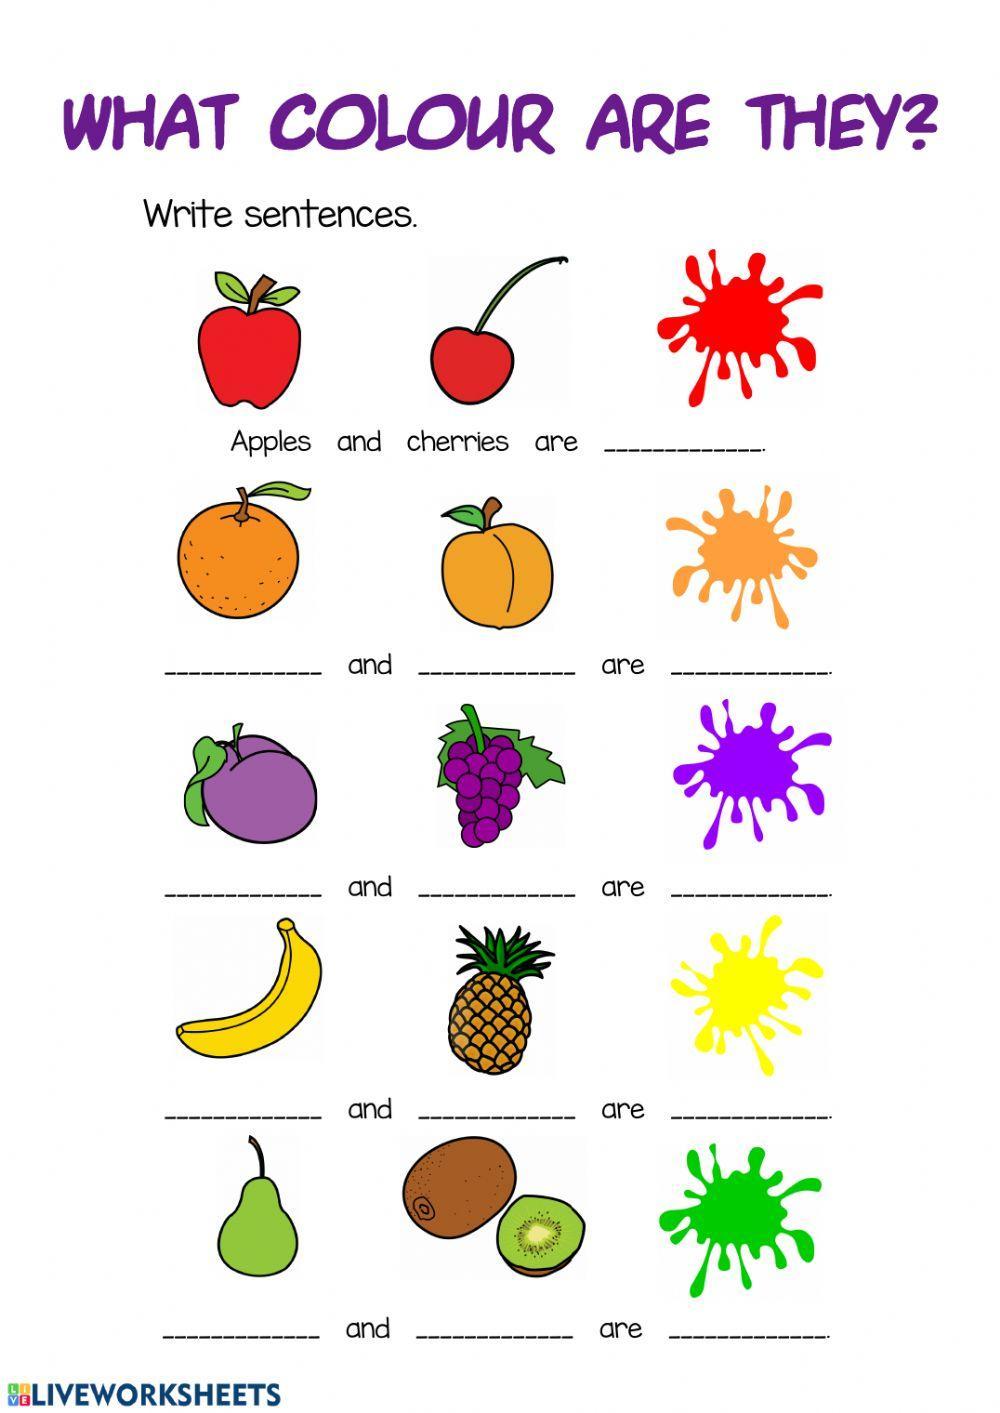 Fruits and colours